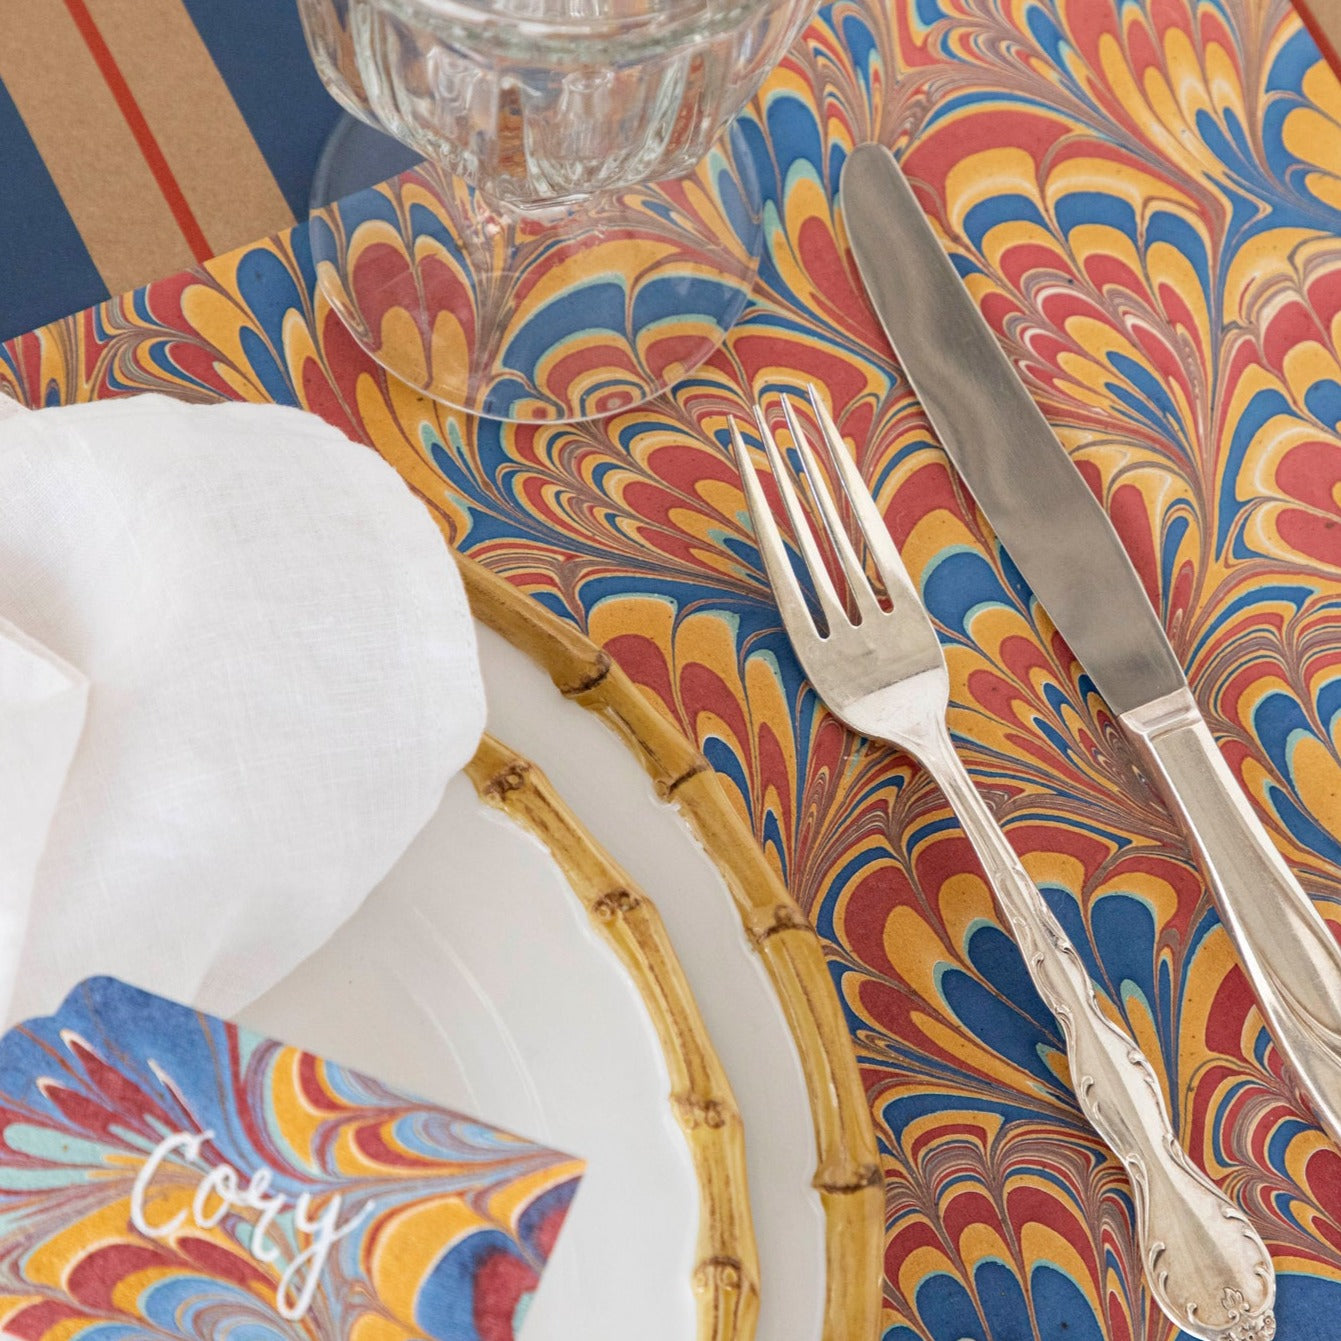 Close-up of the Red &amp; Blue Peacock Marbled Placemat under an elegant place setting.